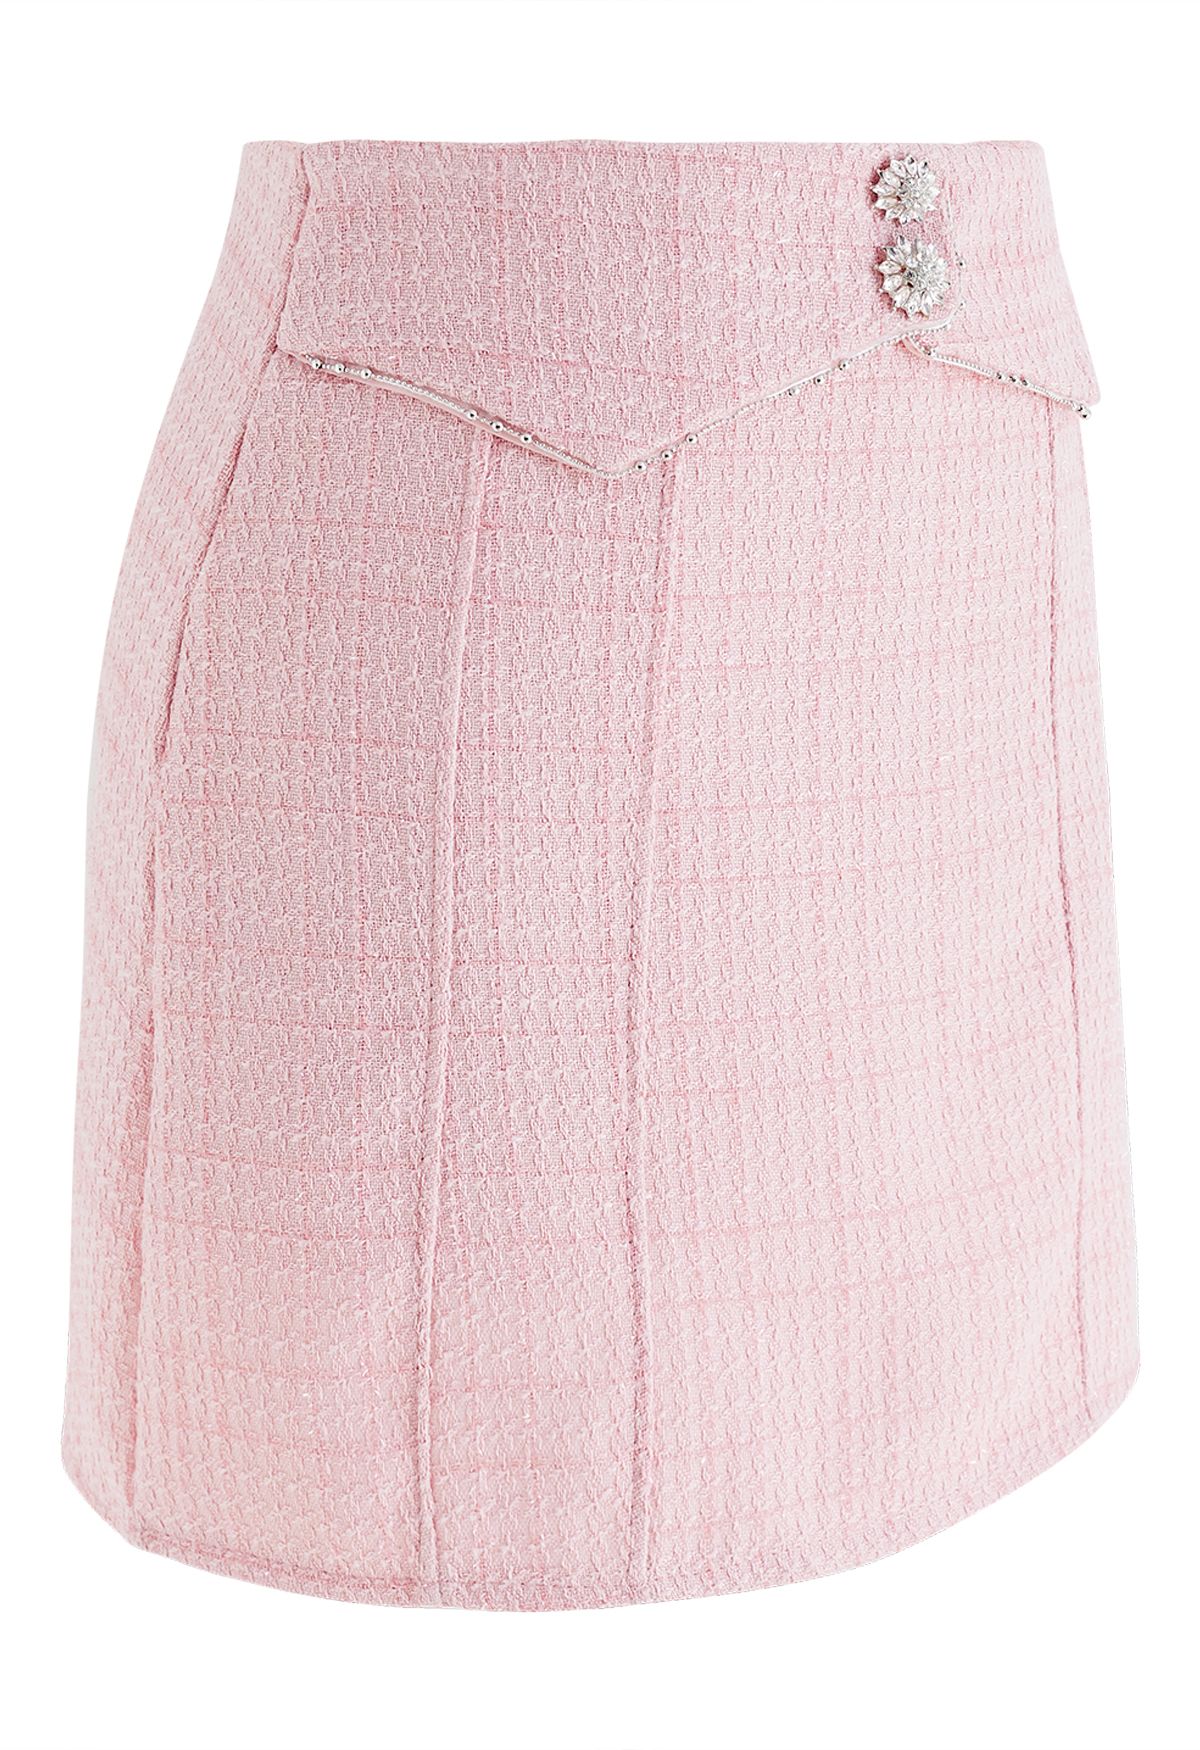 Glint Button Seam Detail Tweed Mini Skirt in Pink - Retro, Indie and ...